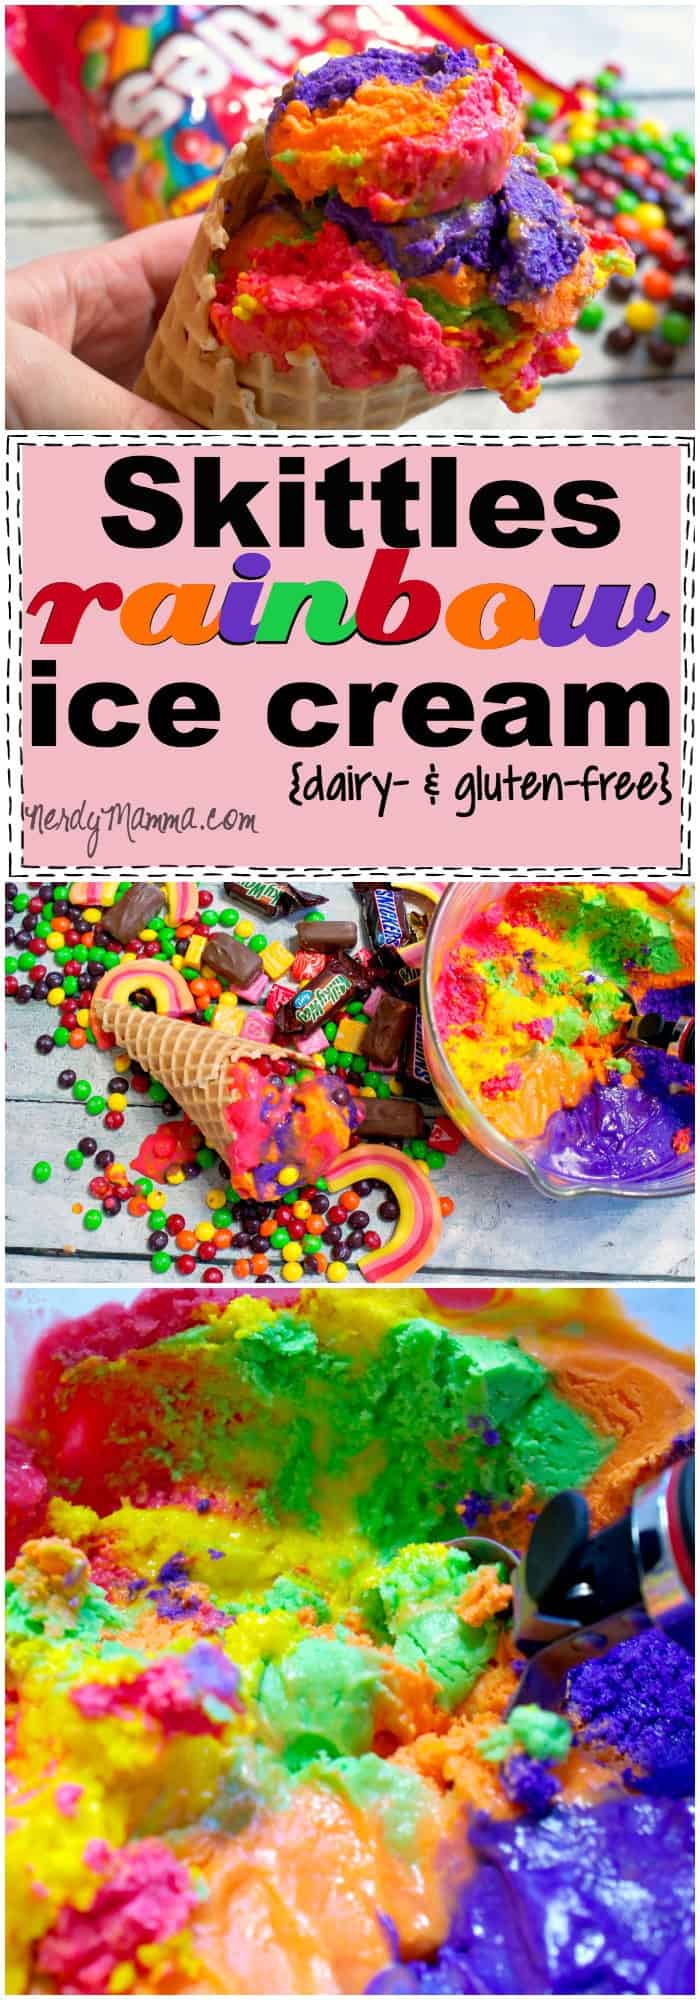 OMG! It's a recipe for Rainbow Ice Cream that totally tastes like Skittles. Holy awesome on a stick. And it's vegan, dairy-free and gluten-free. So. Awesome. With a unicorn on top. #ad #MakeSB50Sweeter #cbias